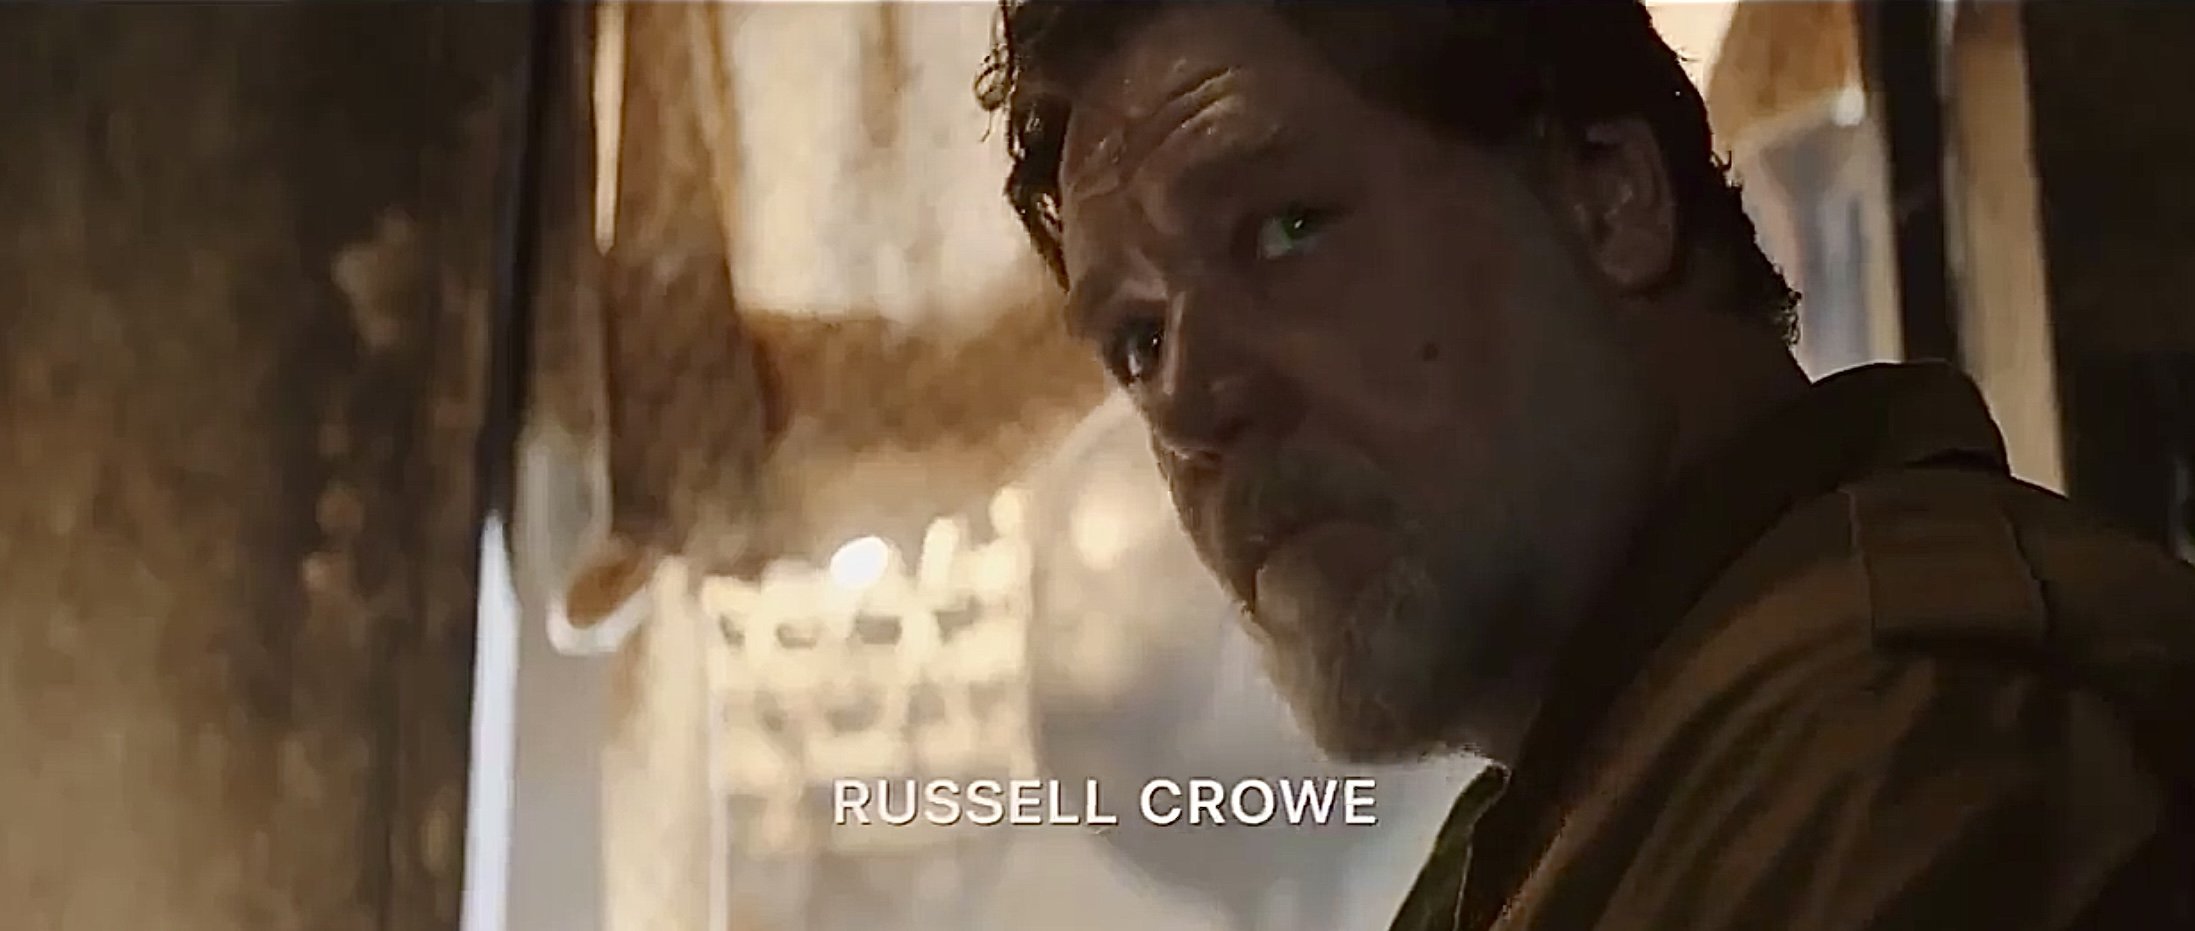 RUSSELL CROWE in "THE GREATEST BEER RUN EVER"